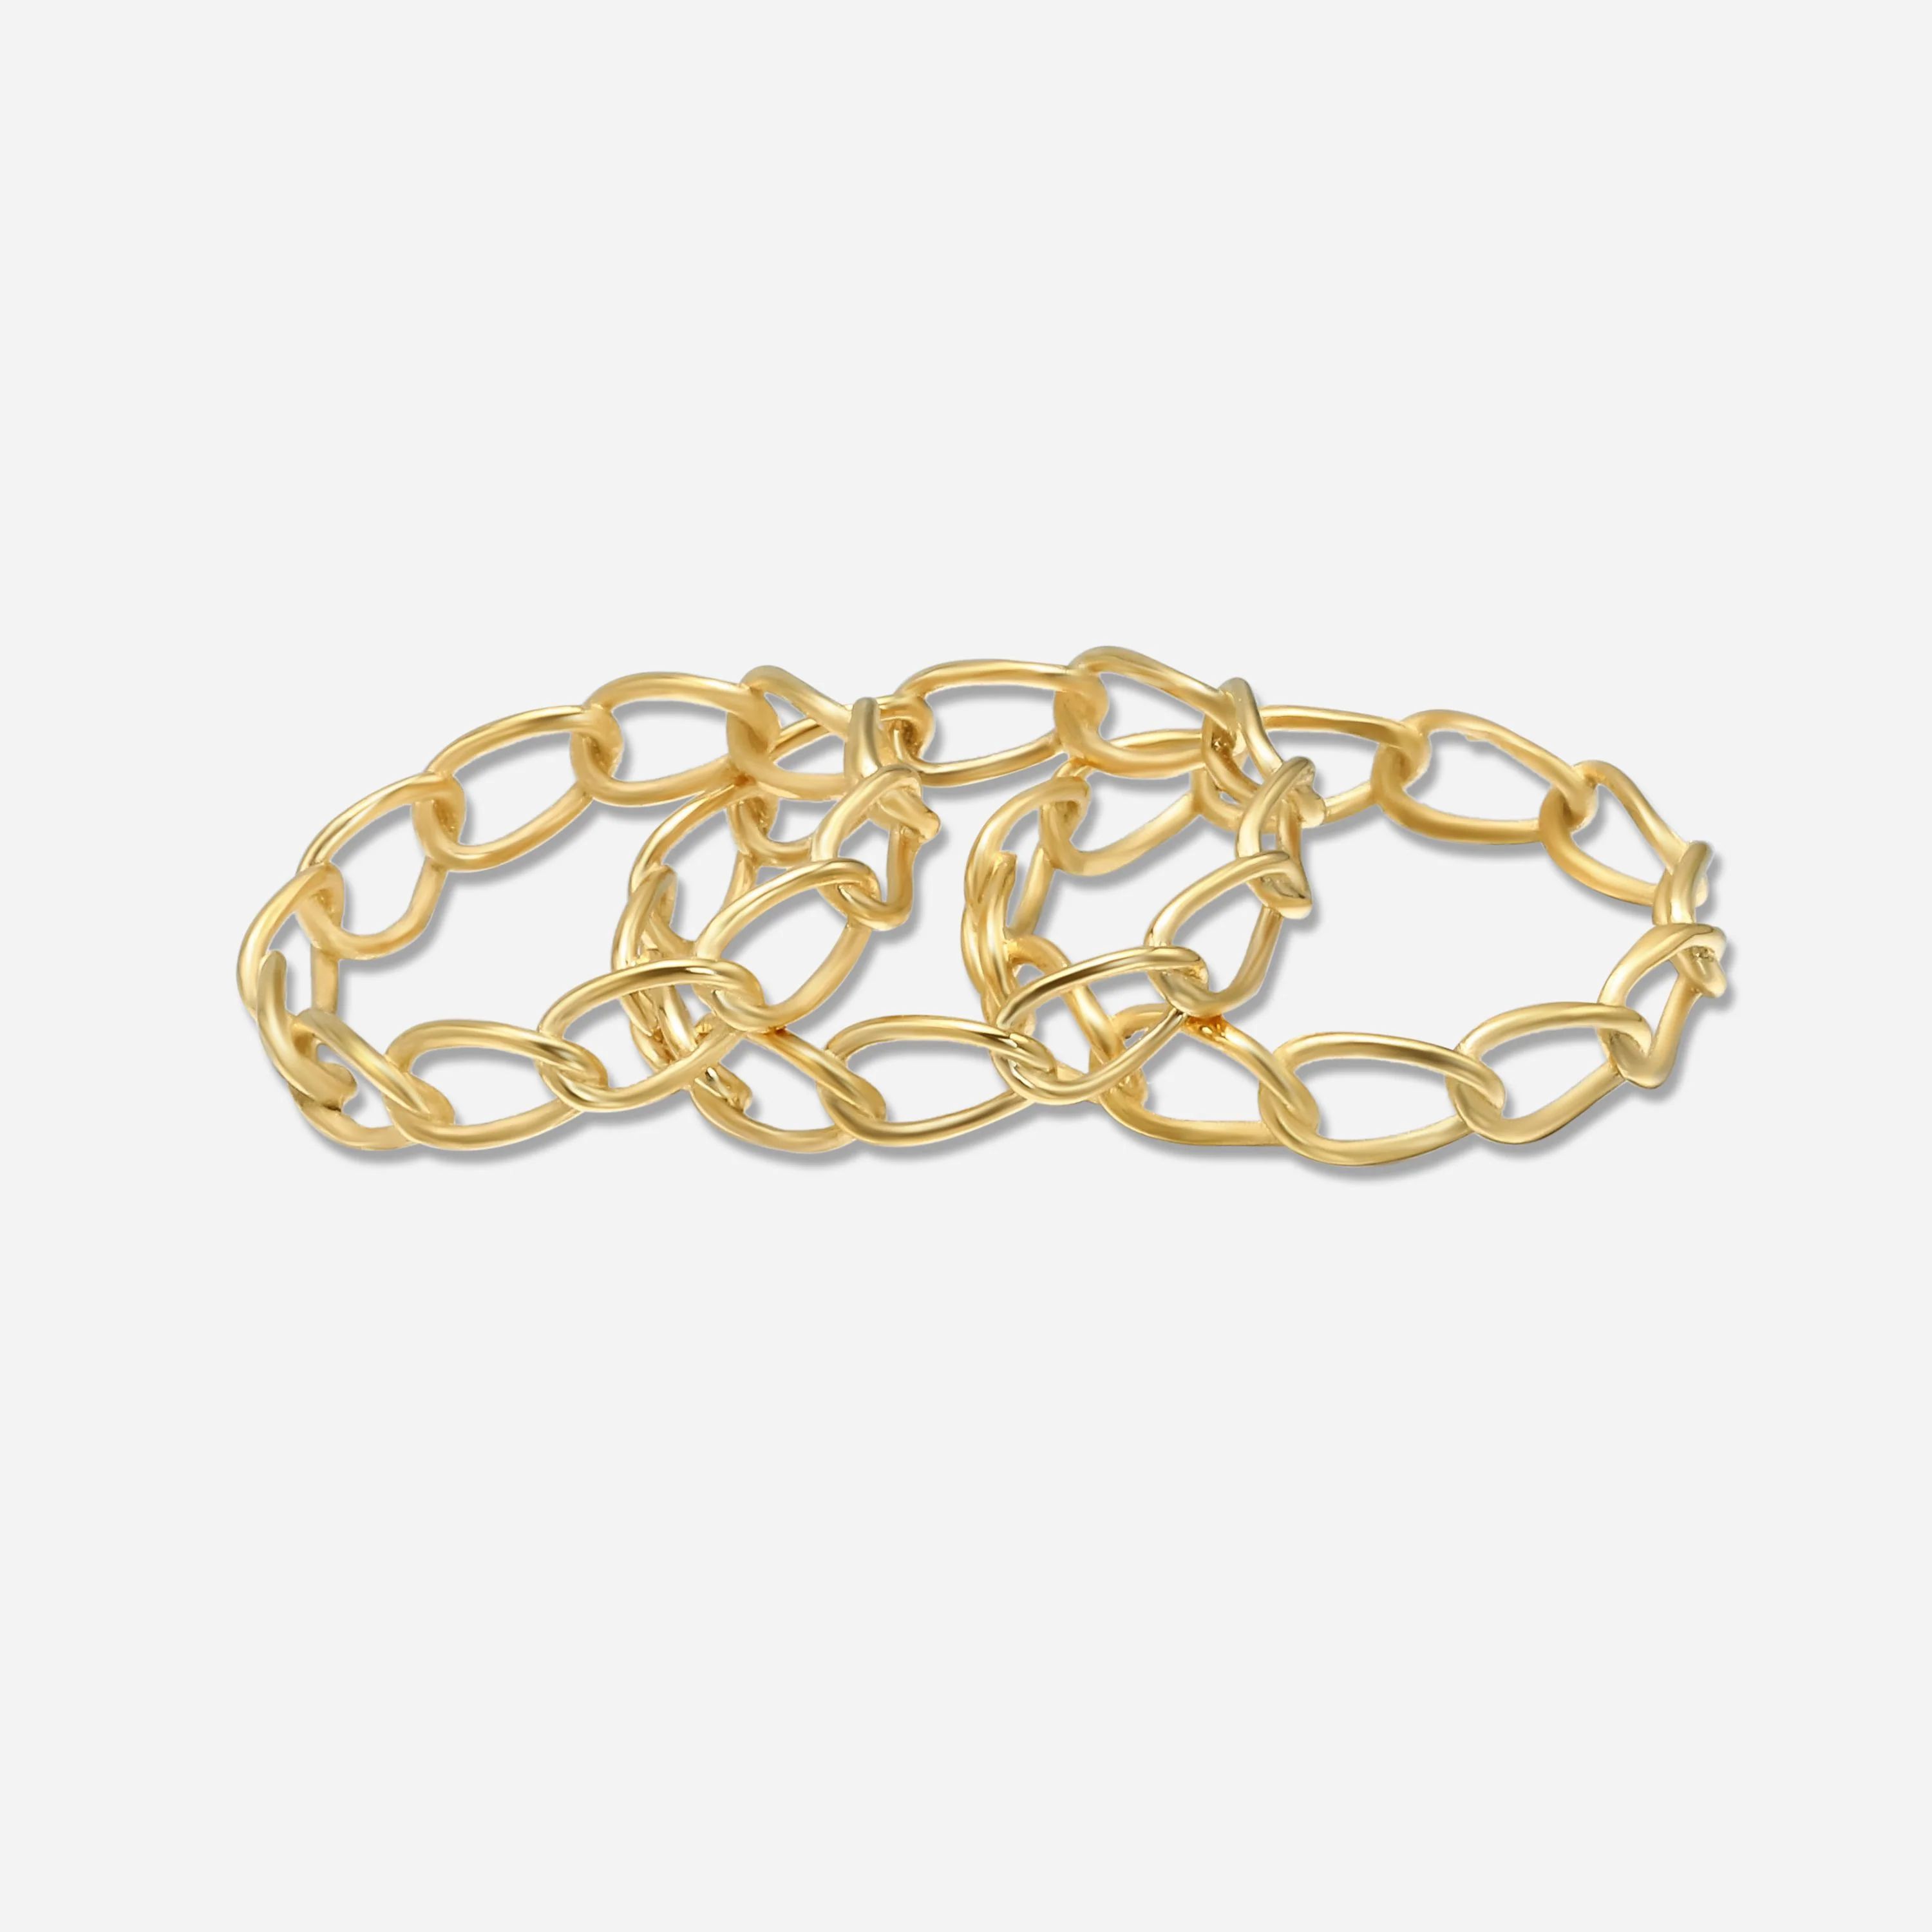 Oval Link Ring Set | Victoria Emerson